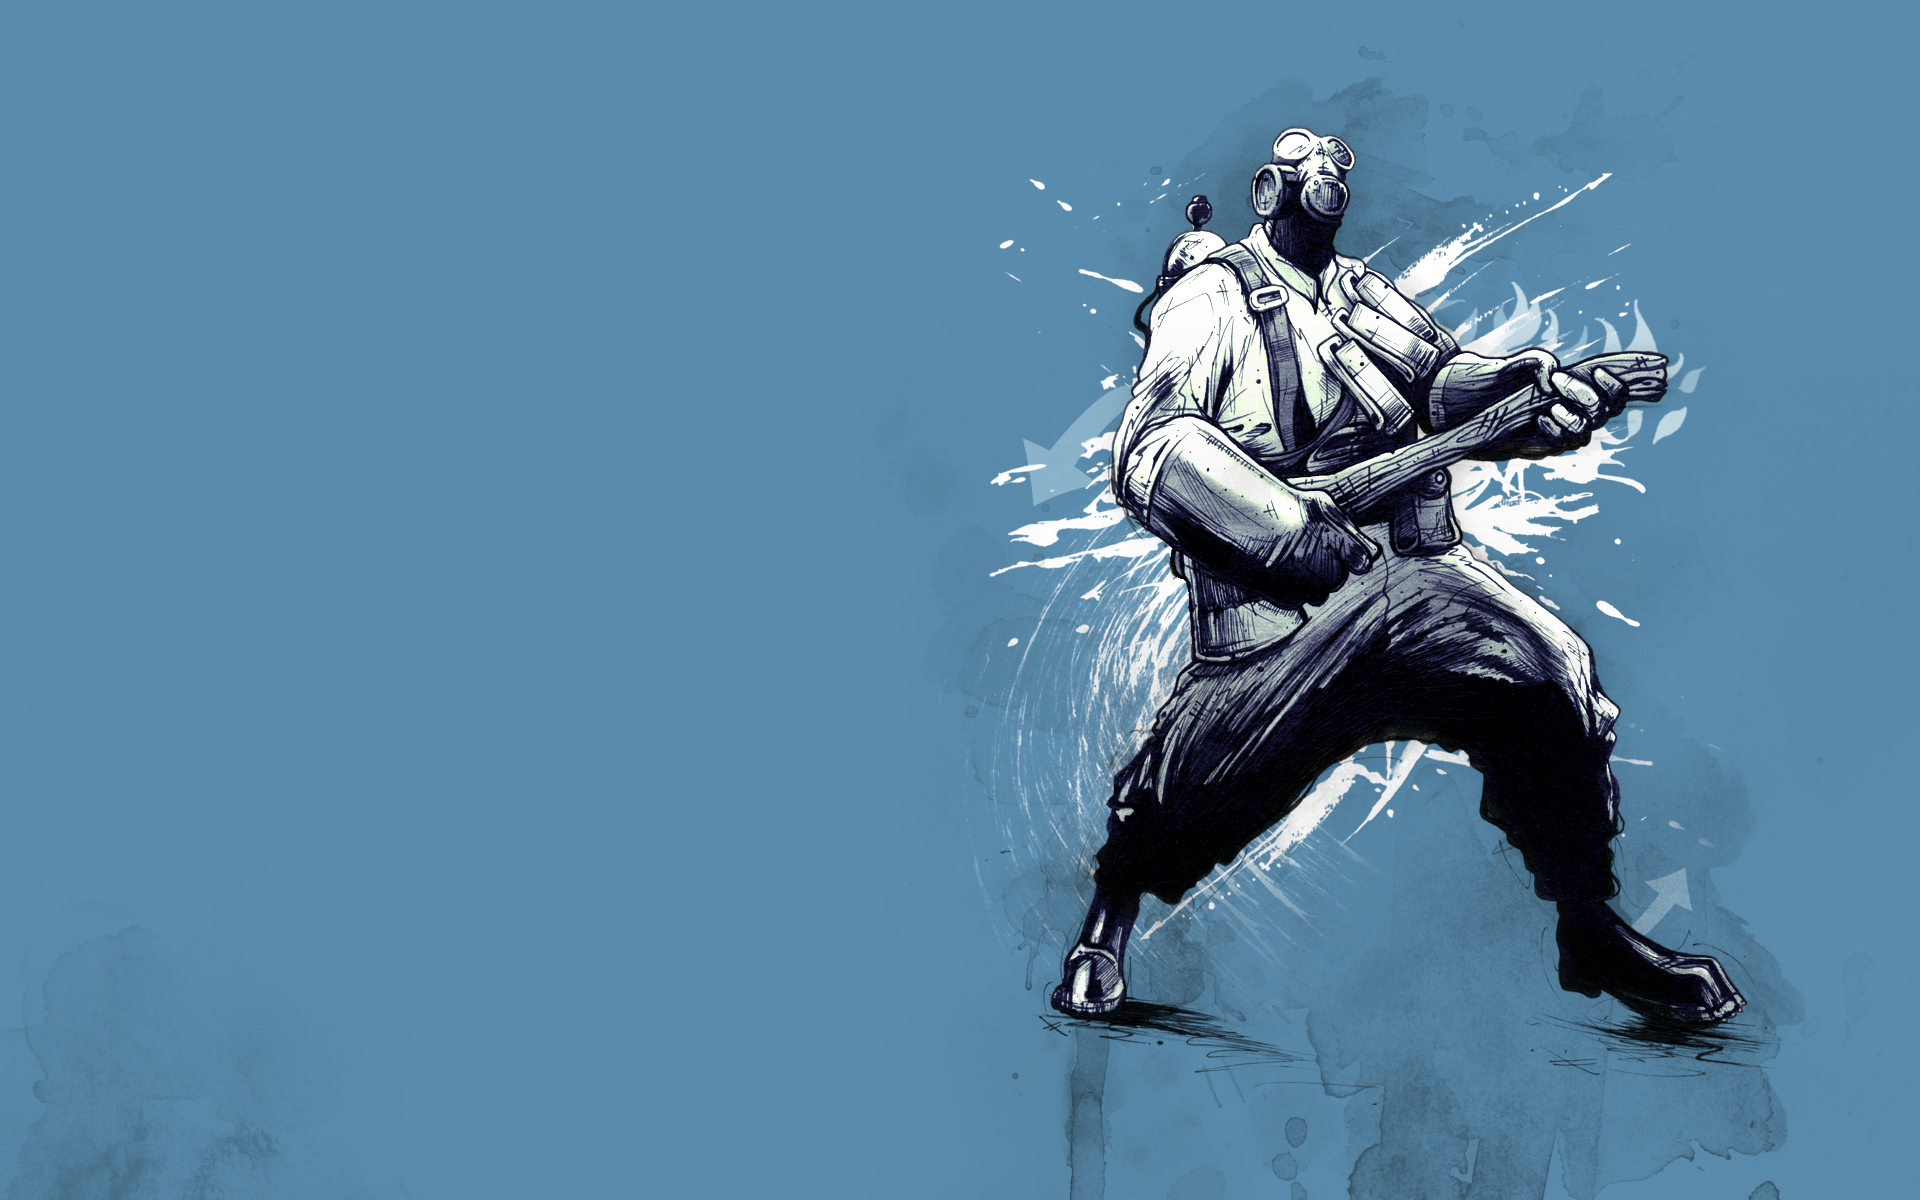 Wallpaper Full HD team fortress 2, video game, pyro (team fortress), team fortress